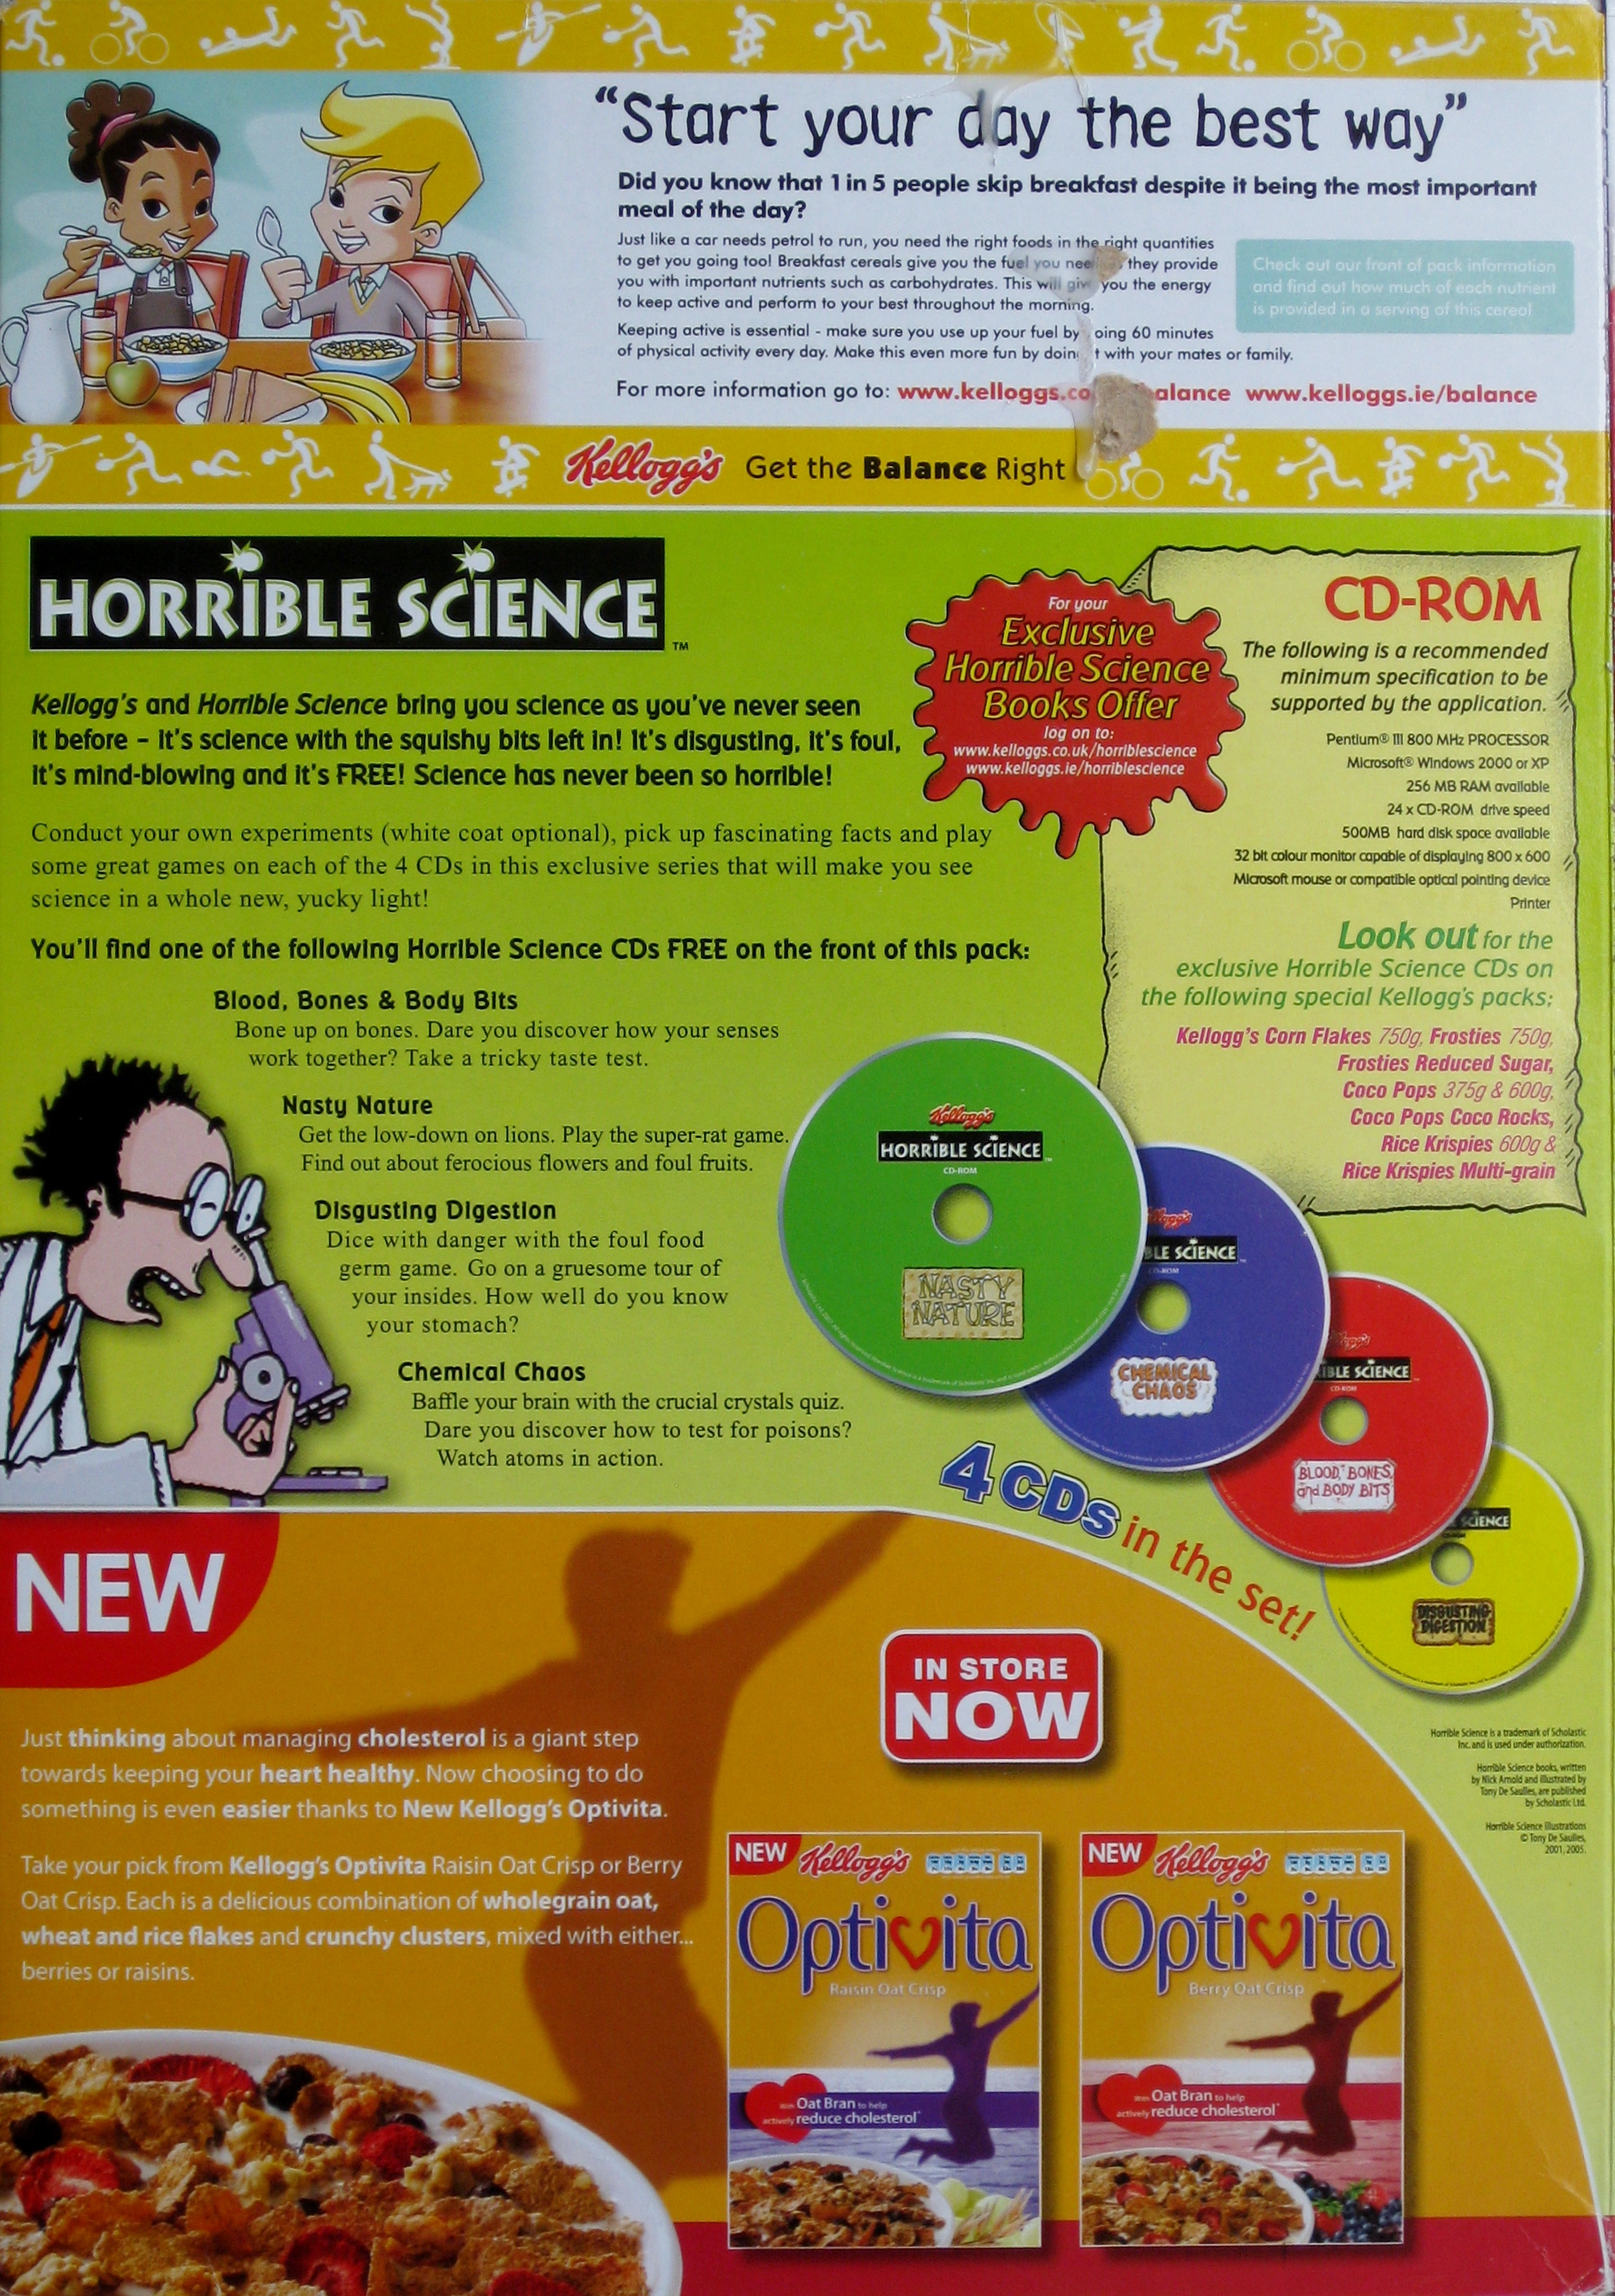 2006 Cornflakes Horrible Science CD Rom back